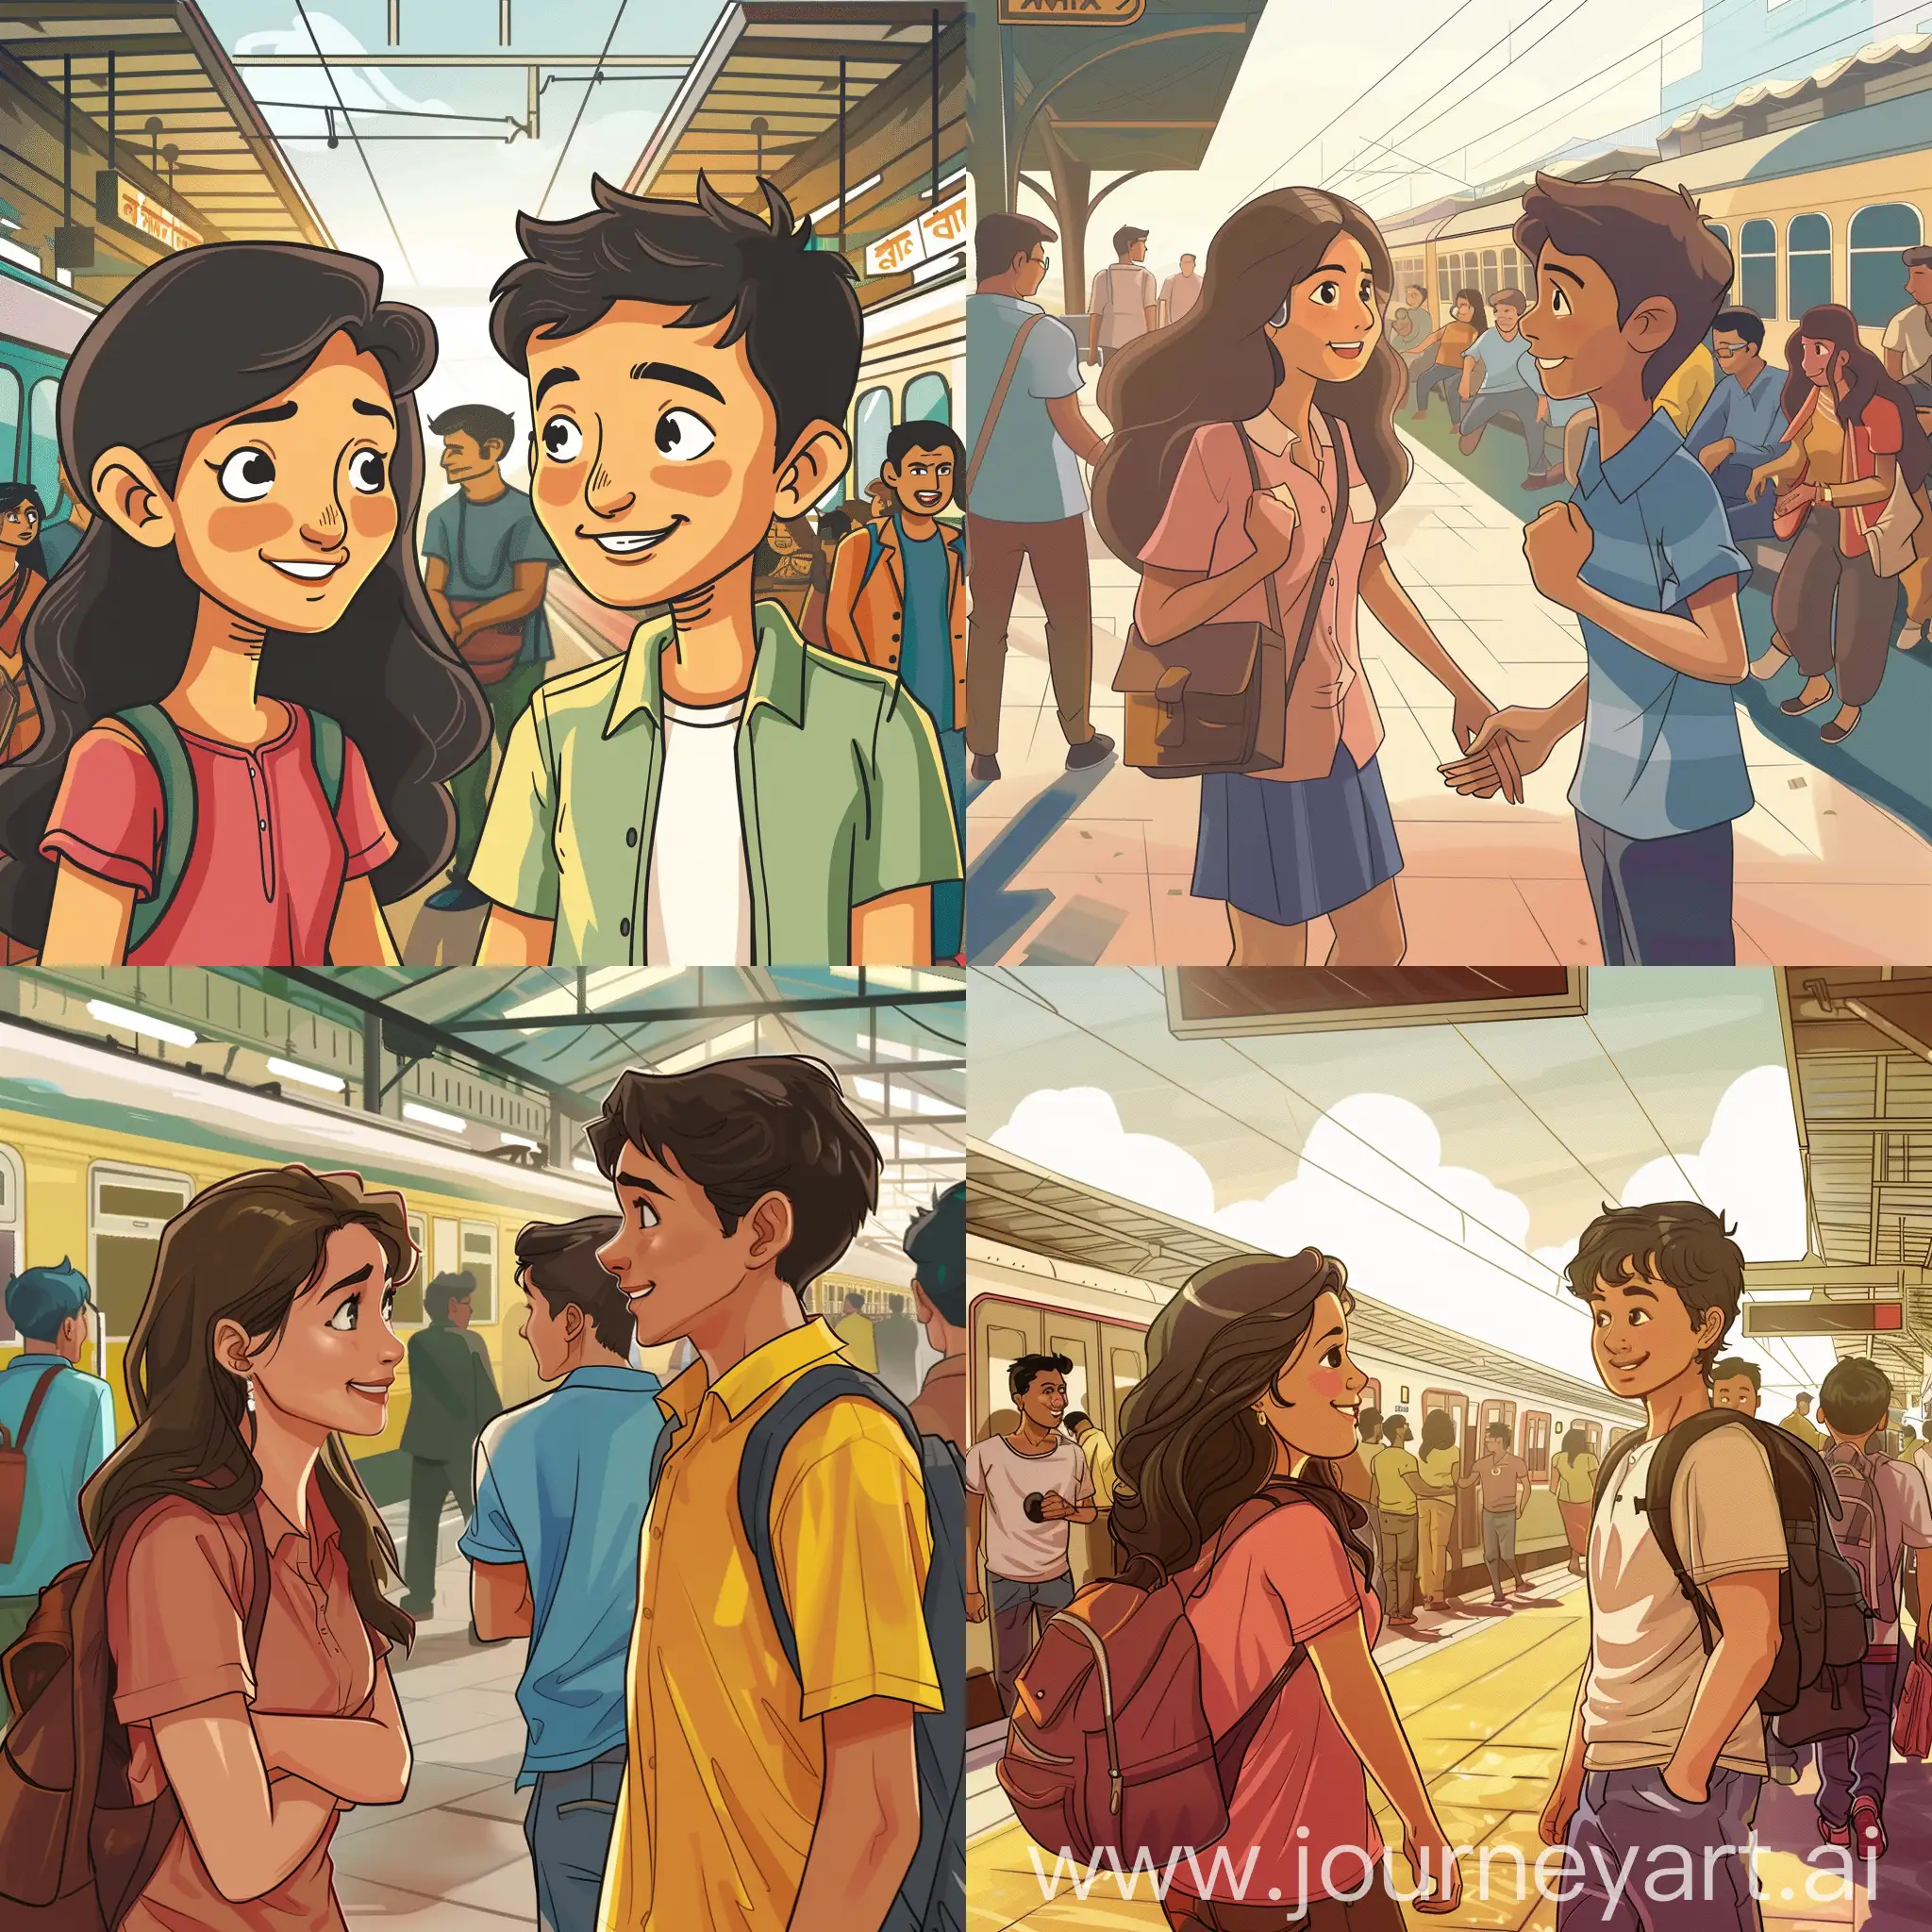 a high-quality cartoon illustration of Anika, a cheerful young woman from Munger, Bihar, and Mohit, a charming boy from Dehri, Bihar, striking up a conversation on Facebook. The scene captures their transformation from casual messaging to late-night calls, sharing deepest secrets, talking about dreams, fears, and memories. Anika describes the hustle of Munger, while Mohit paints vivid pictures of serene Dehri. Their virtual bond blossoms into deep love, despite the distance, leading to a decision to meet in Patna, the capital city of Bihar. The illustration shows Anika and Mohit locking eyes for the first time at a bustling train station in Patna, symbolizing the realization of their love story. It conveys the warmth, emotions, and connection between them, highlighting that true love knows no bounds. The style is cartoon, capturing the heartfelt moments and emotions in a colorful and expressive manner.